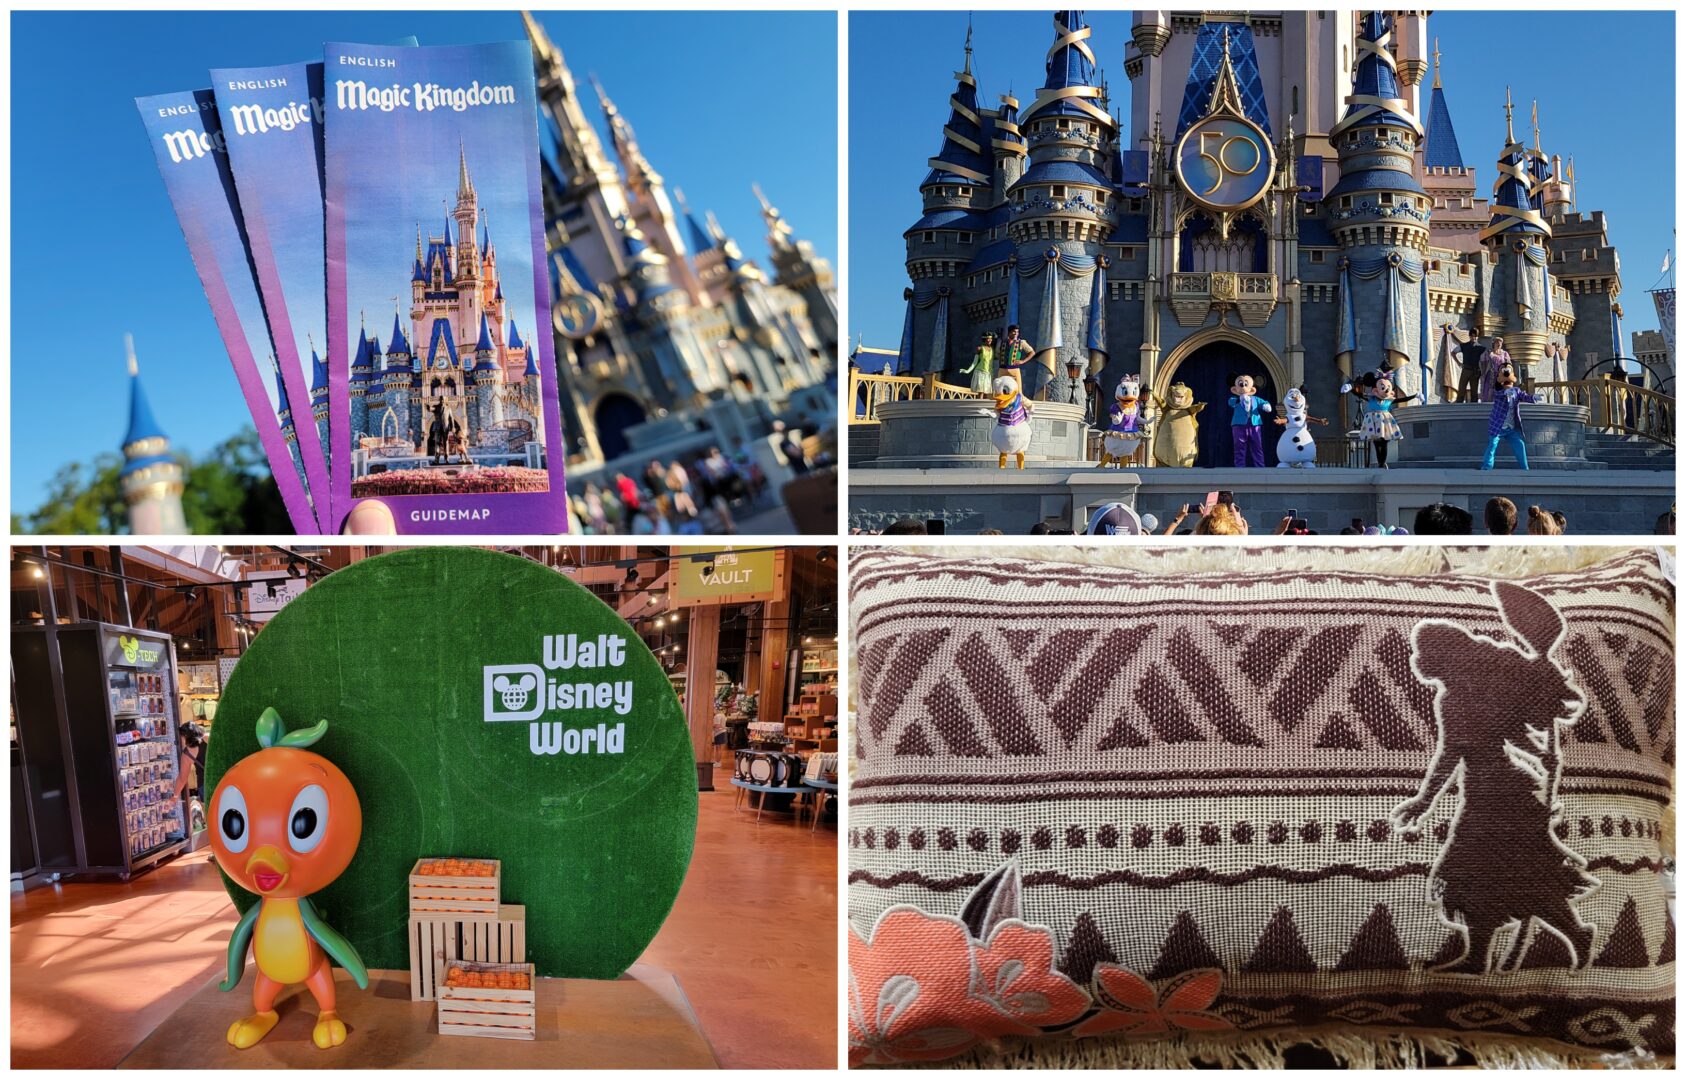 Disney News Highlights: Walt Disney World 50th-Anniversary Ends, New Park Guide Maps, Fab 50 Statues to Remain, Castle Decorations Coming Down